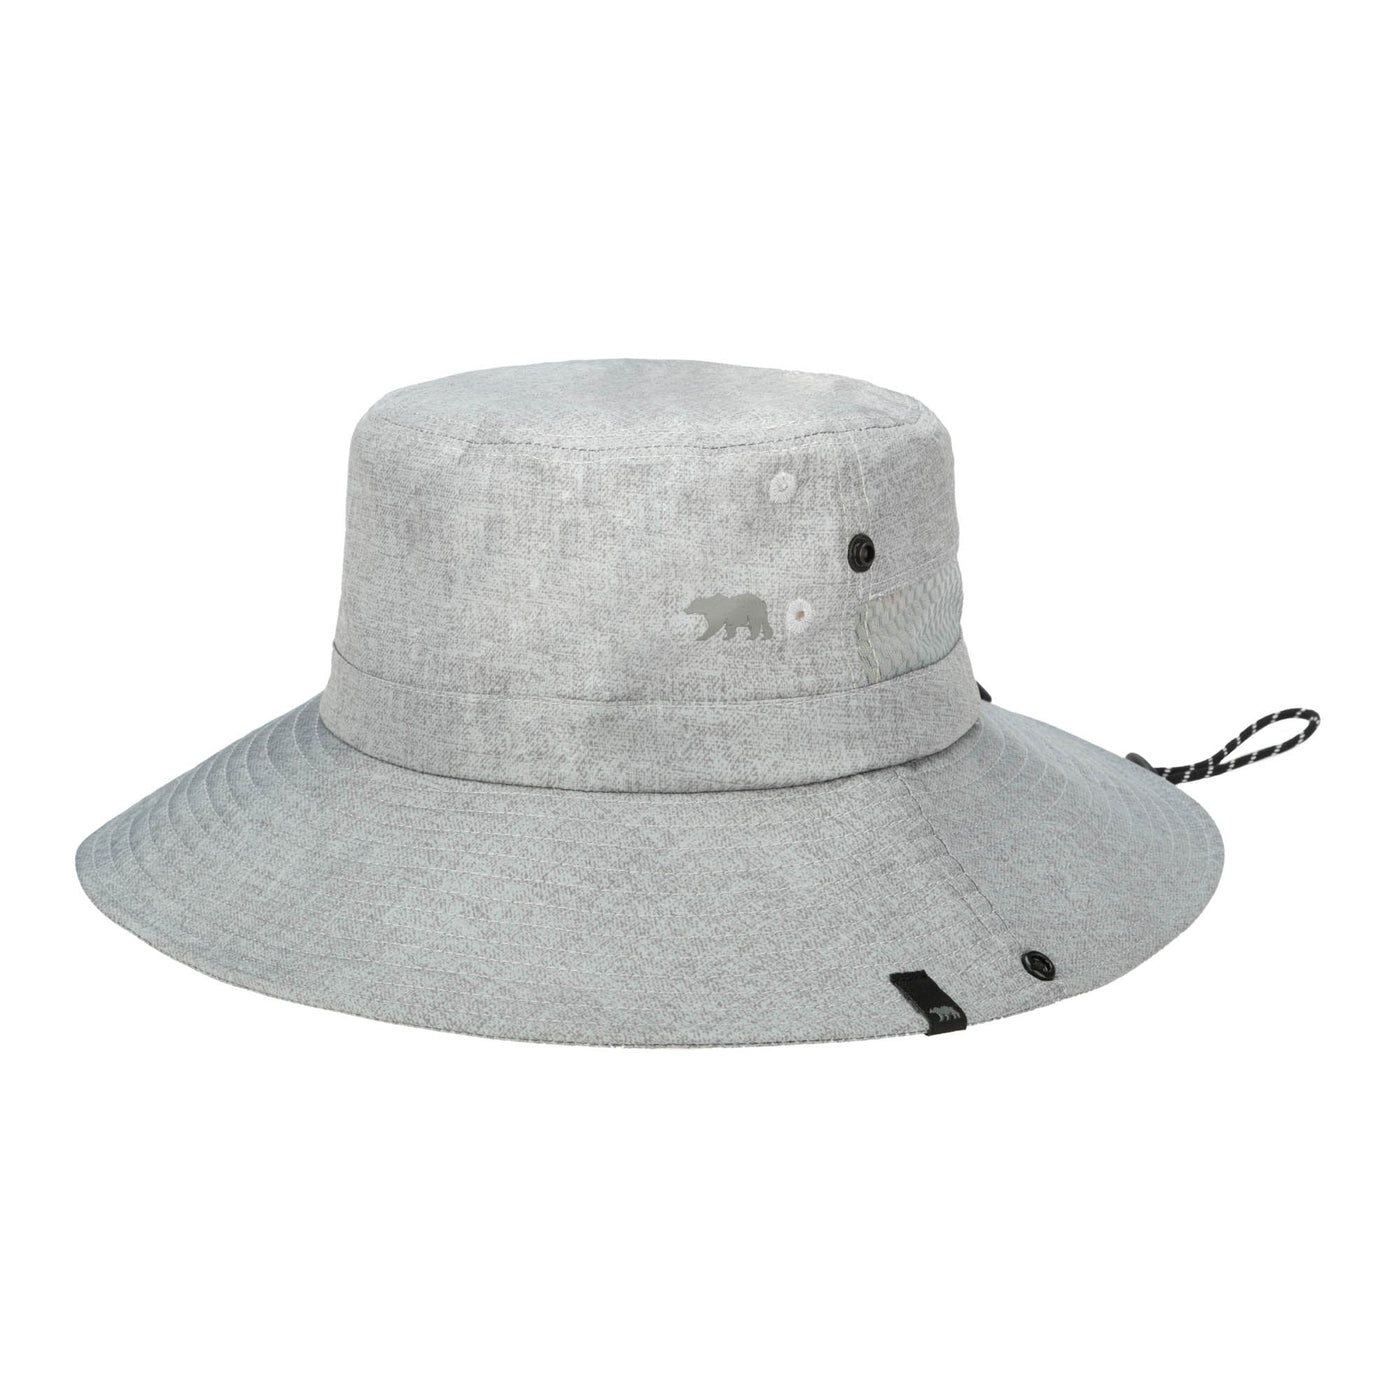 Outdoor Boonie Hat – Cord Chin and San Flap Adjustable Hat with Company Neck Diego